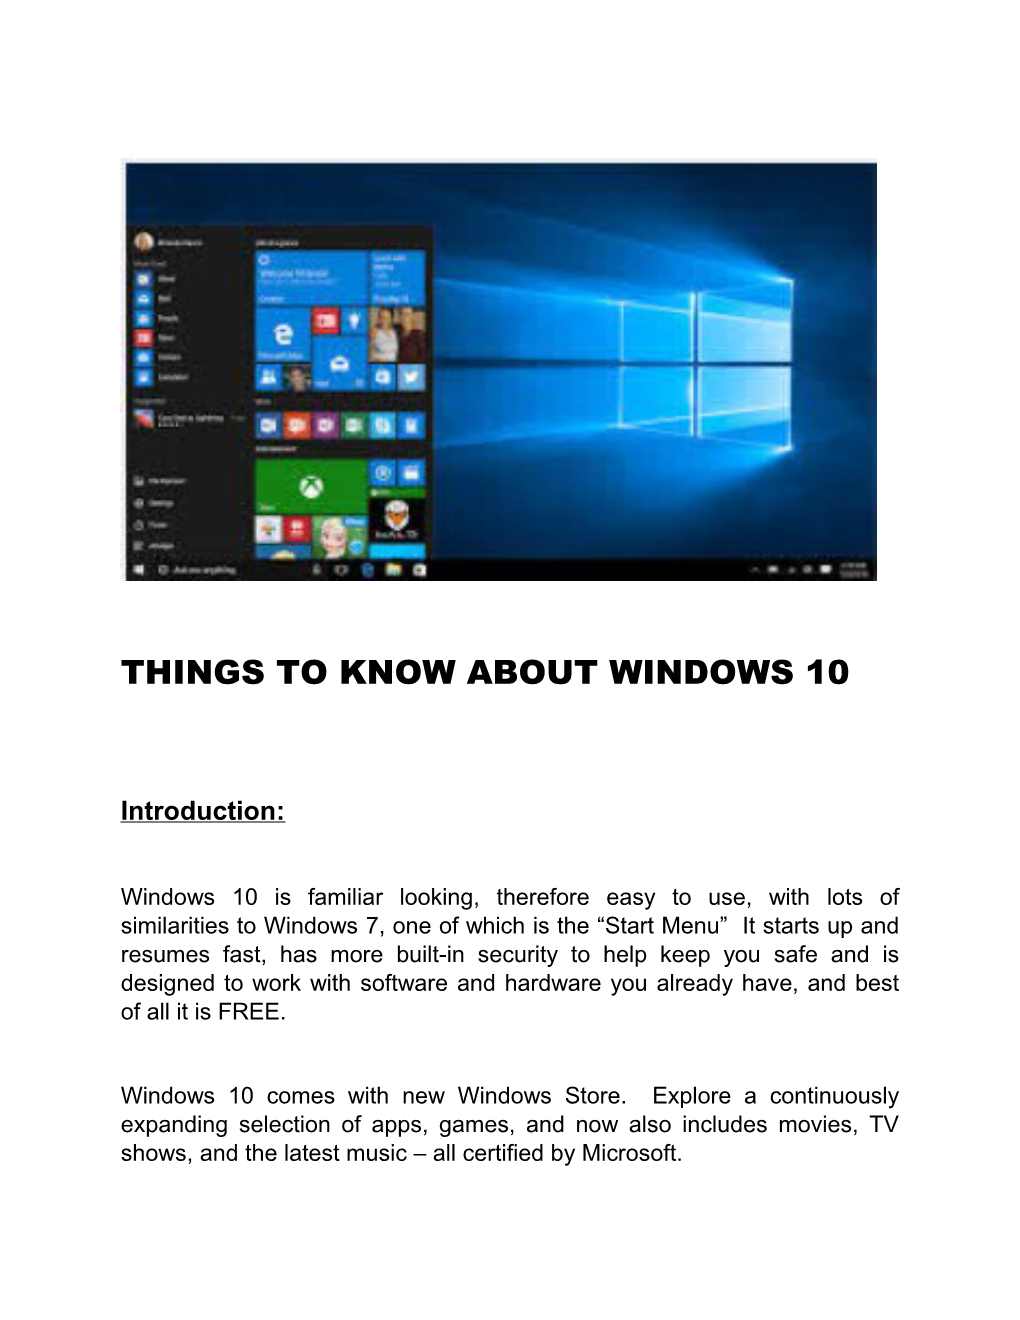 Things to Know About Windows 10